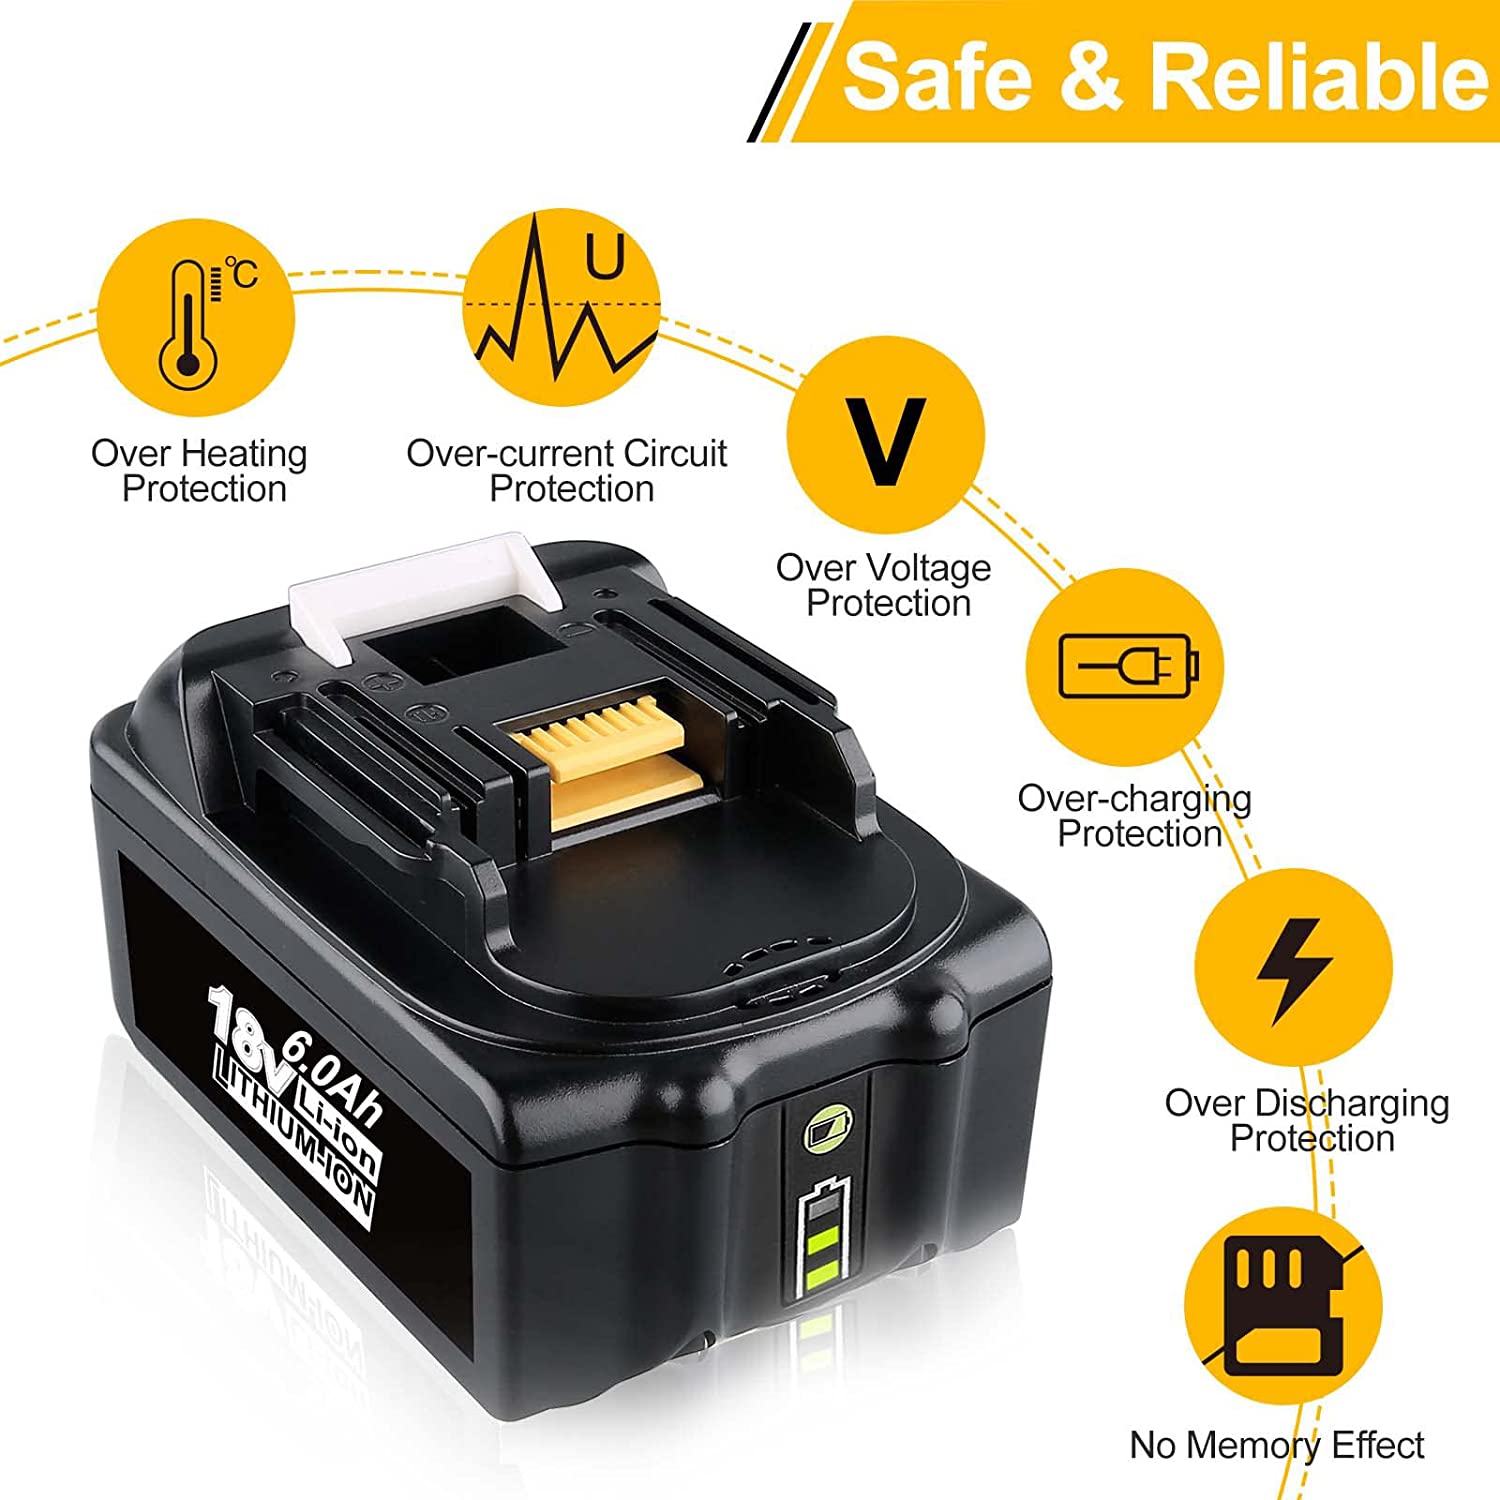 For Makita 18V Battery Replacement With LED Indicator | BL1860B BL1840 BL1850 BL1830 18V 6.0Ah Li-ion Battery 4 Pack